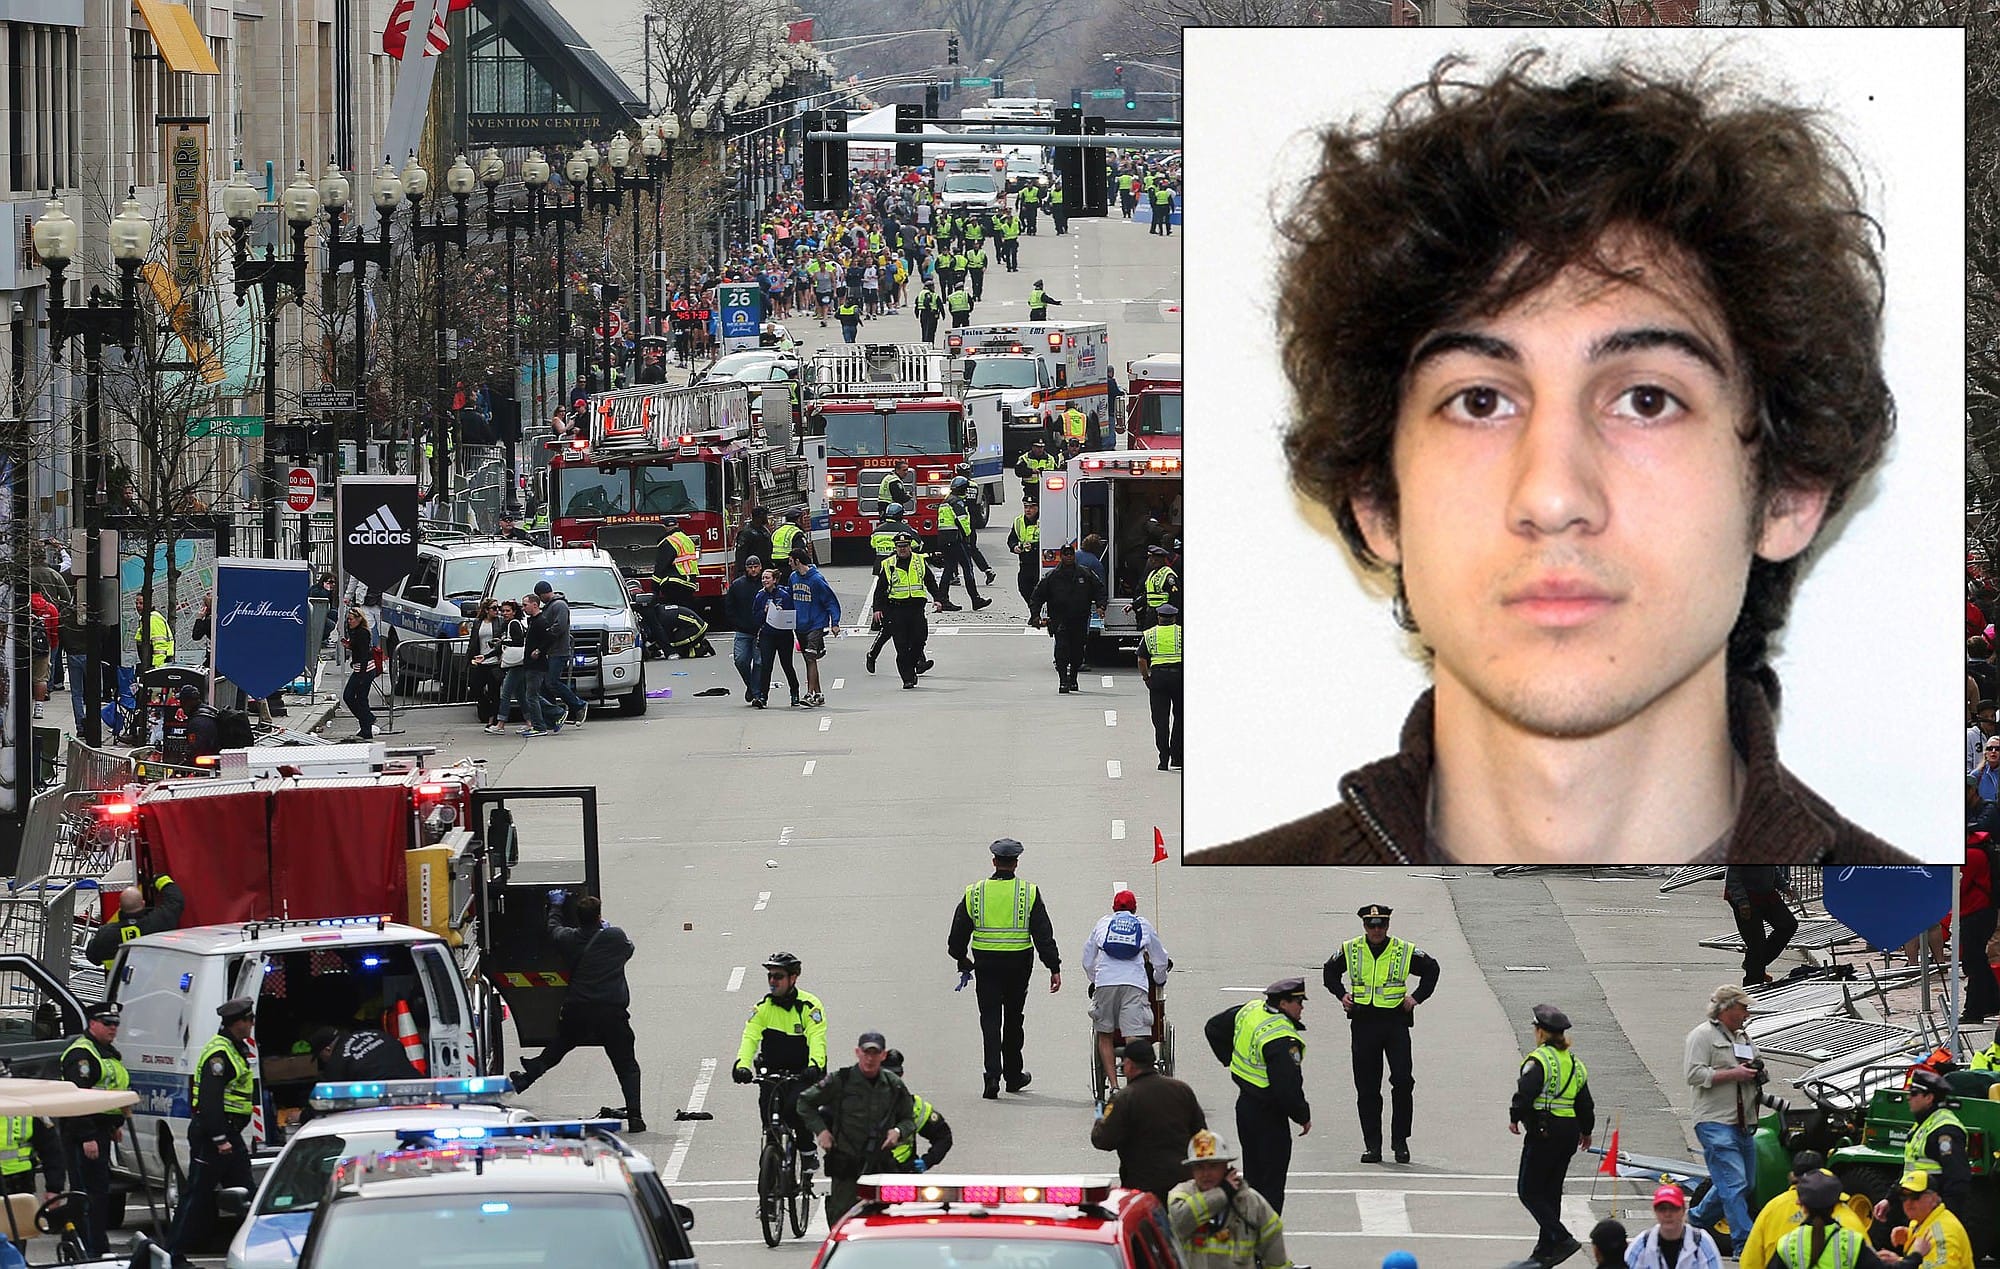 Jurors in the trial of Boston Marathon bomber Dzhokhar Tsarnaev have completed deliberations in the first phase of his federal death penalty trial.